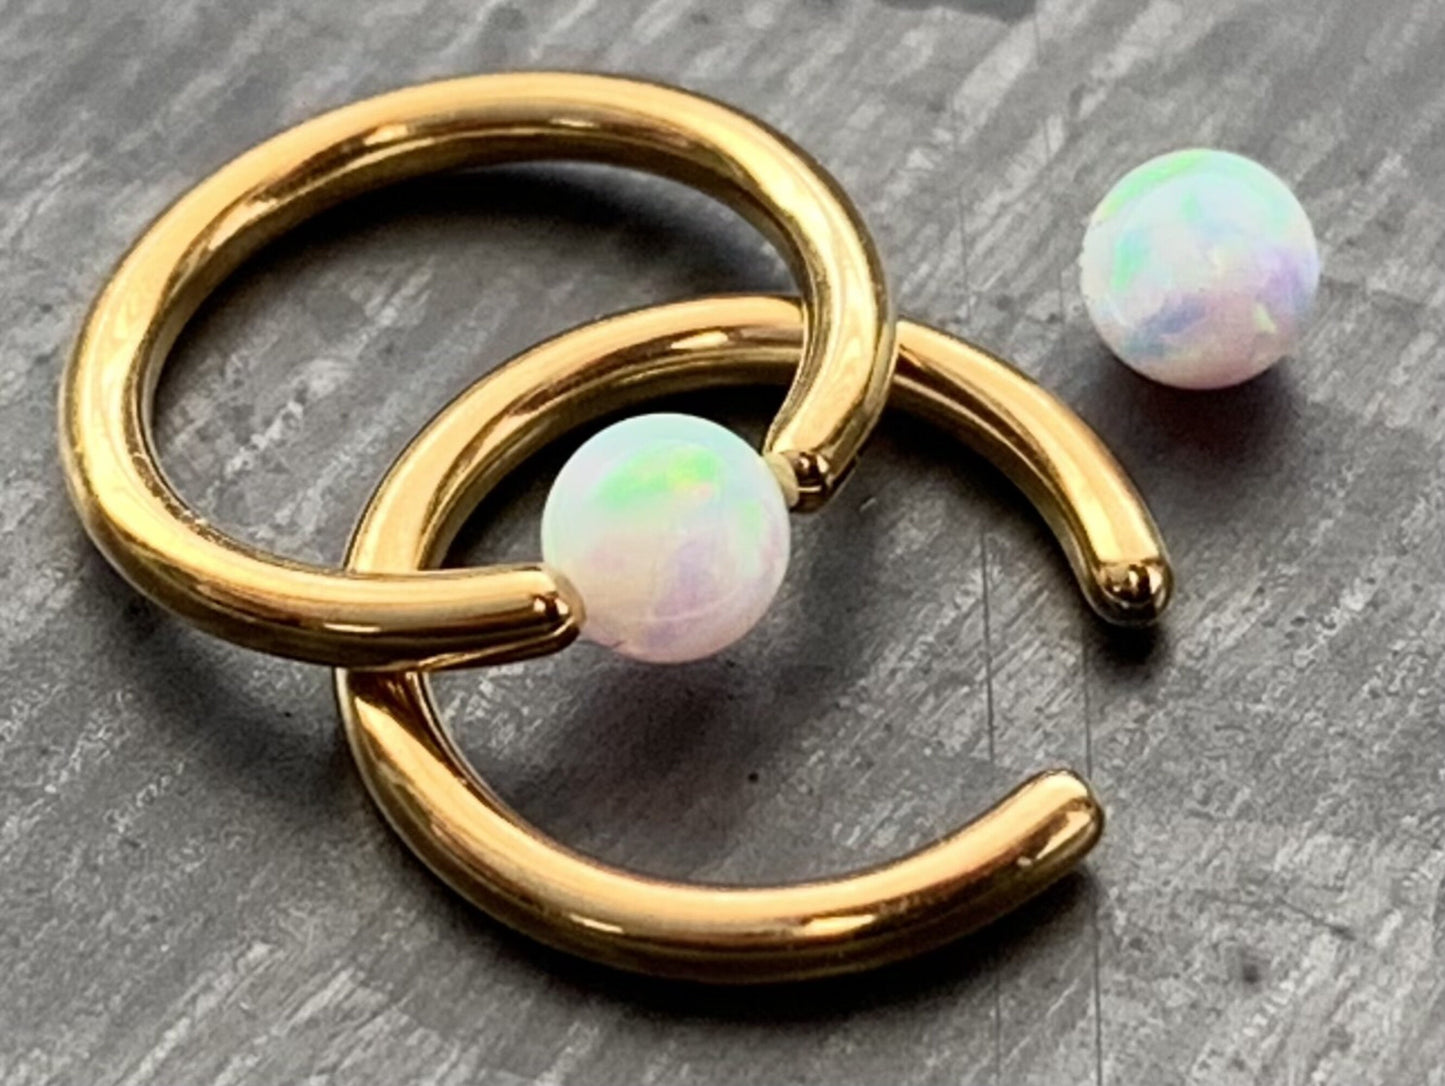 PAIR of Beautiful Synthetic Opal Ball Ion Plated Captive Bead Rings - 16g - 5/16" (8mm) - Black, Gold, Rose Gold and Rainbow Available!